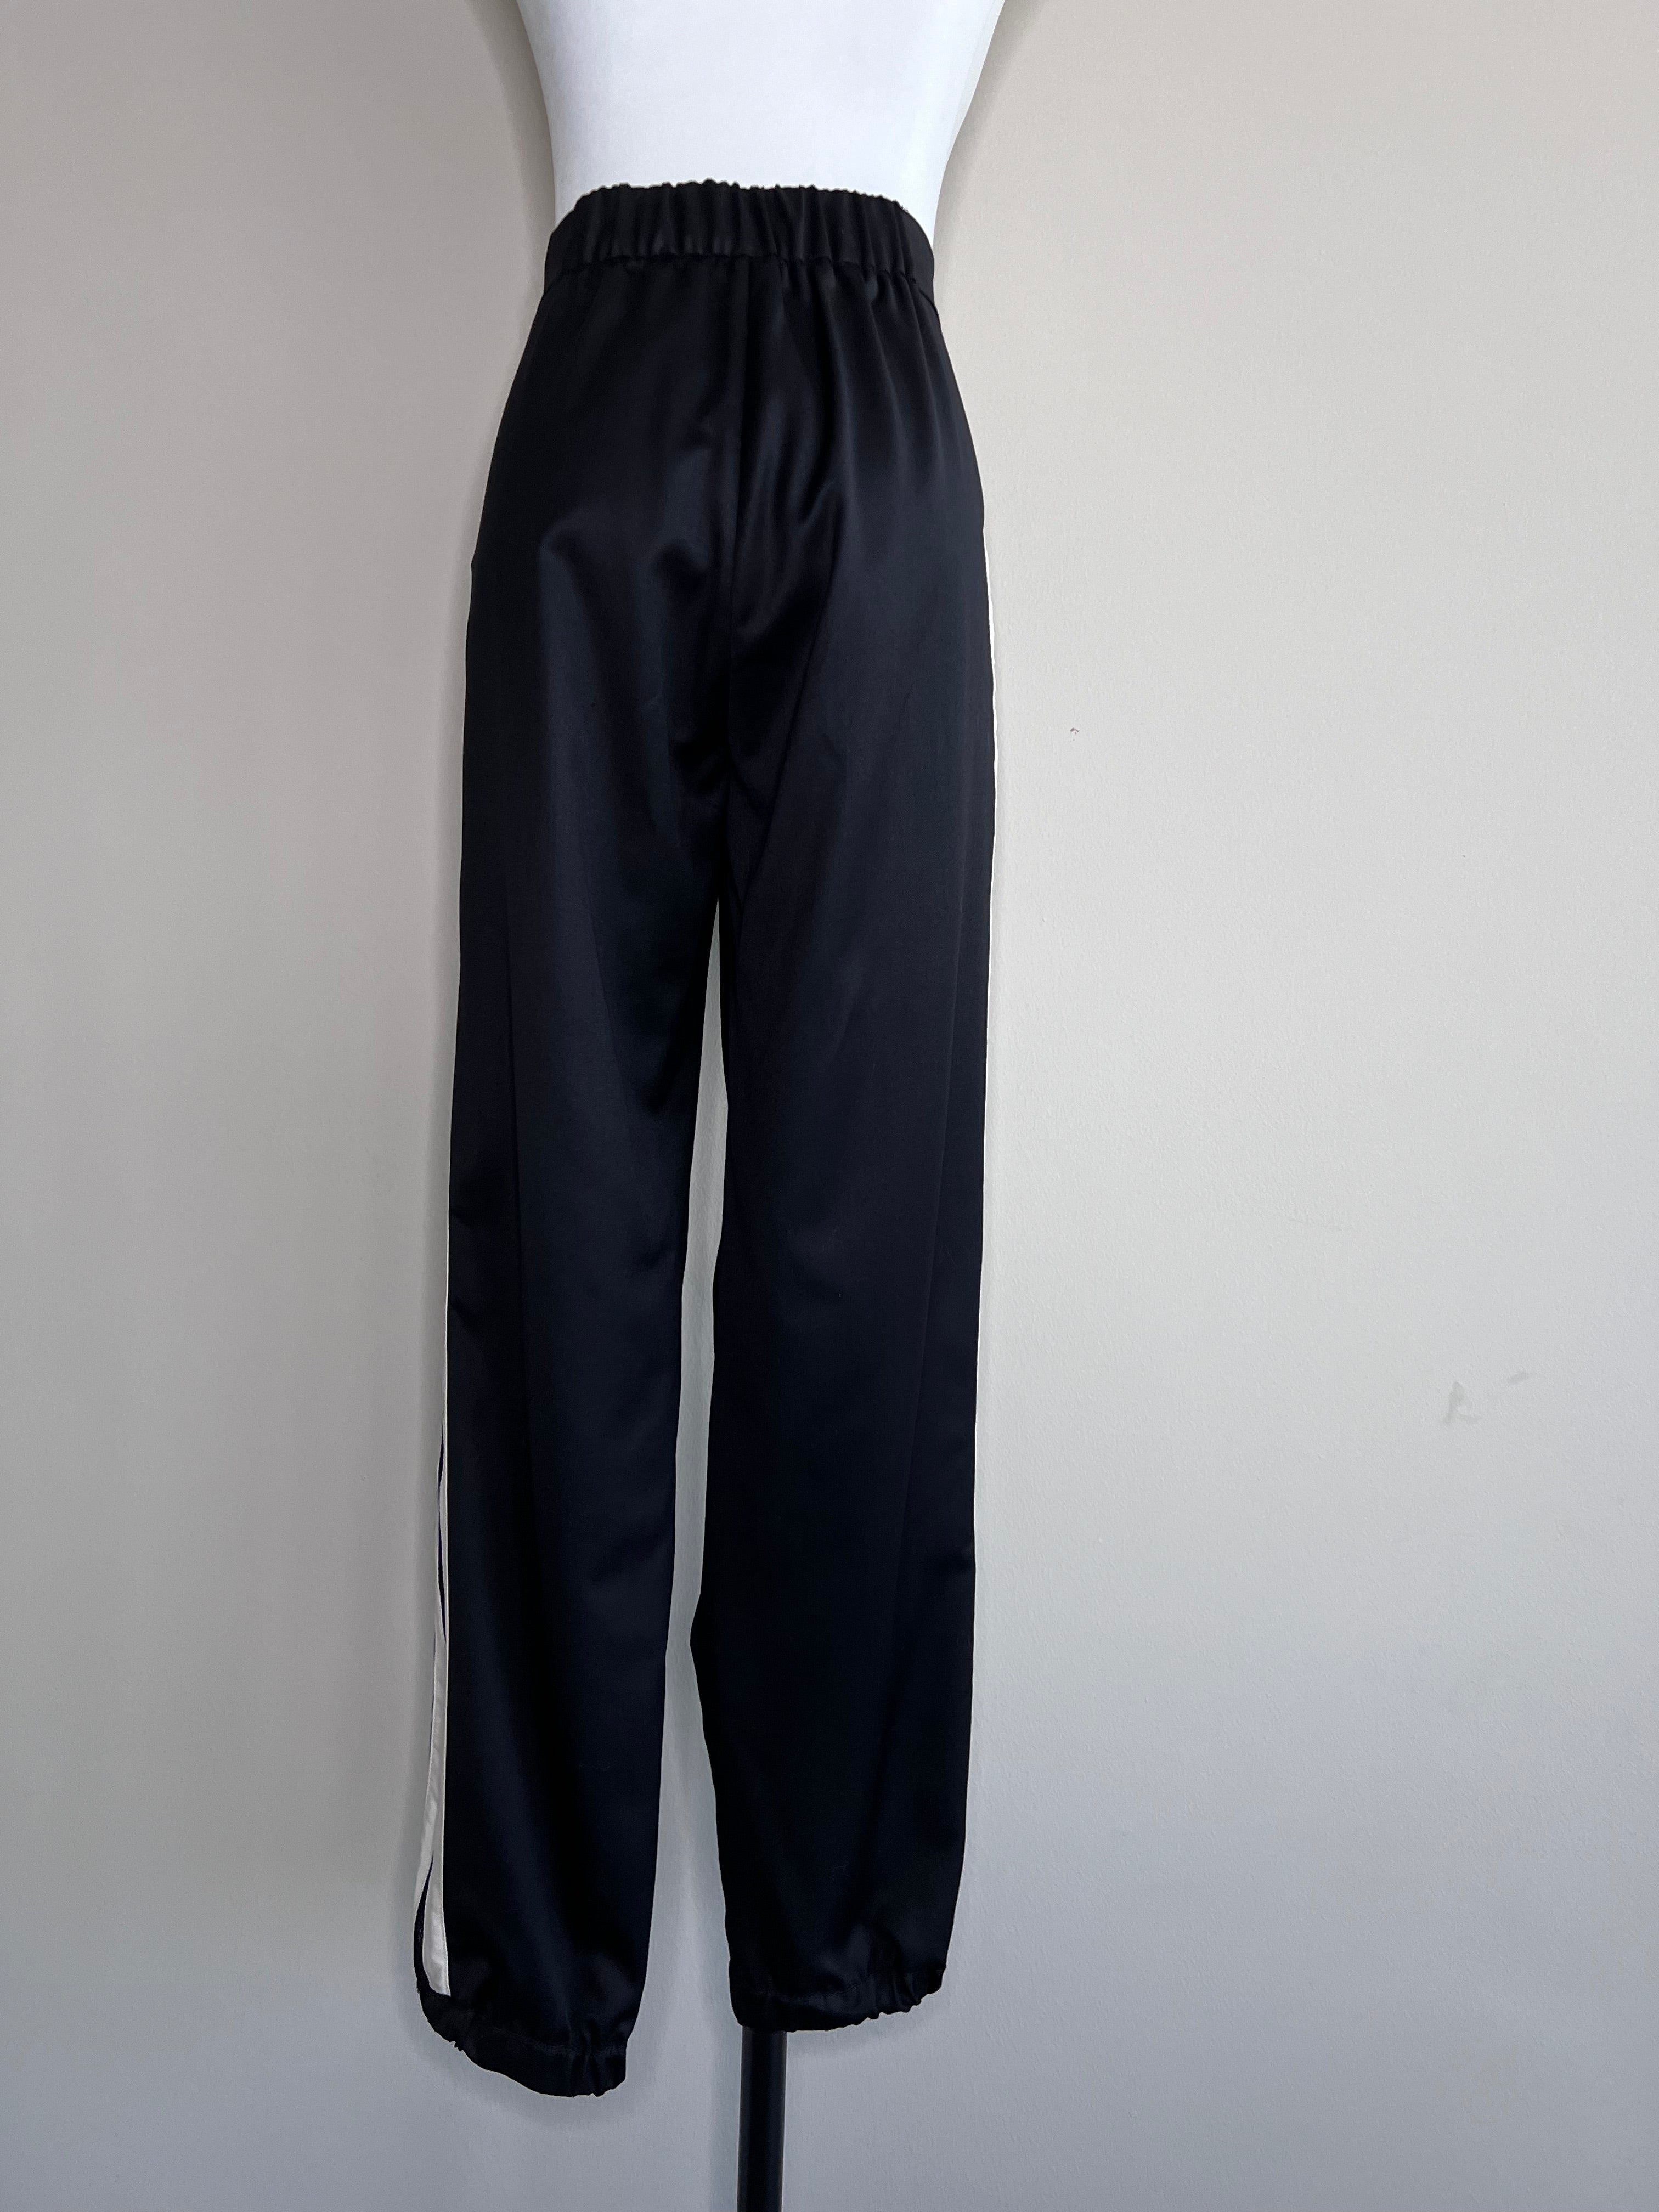 Black satin relaxed fit pants with whote linings on the side - ELIZABETH and JAMES